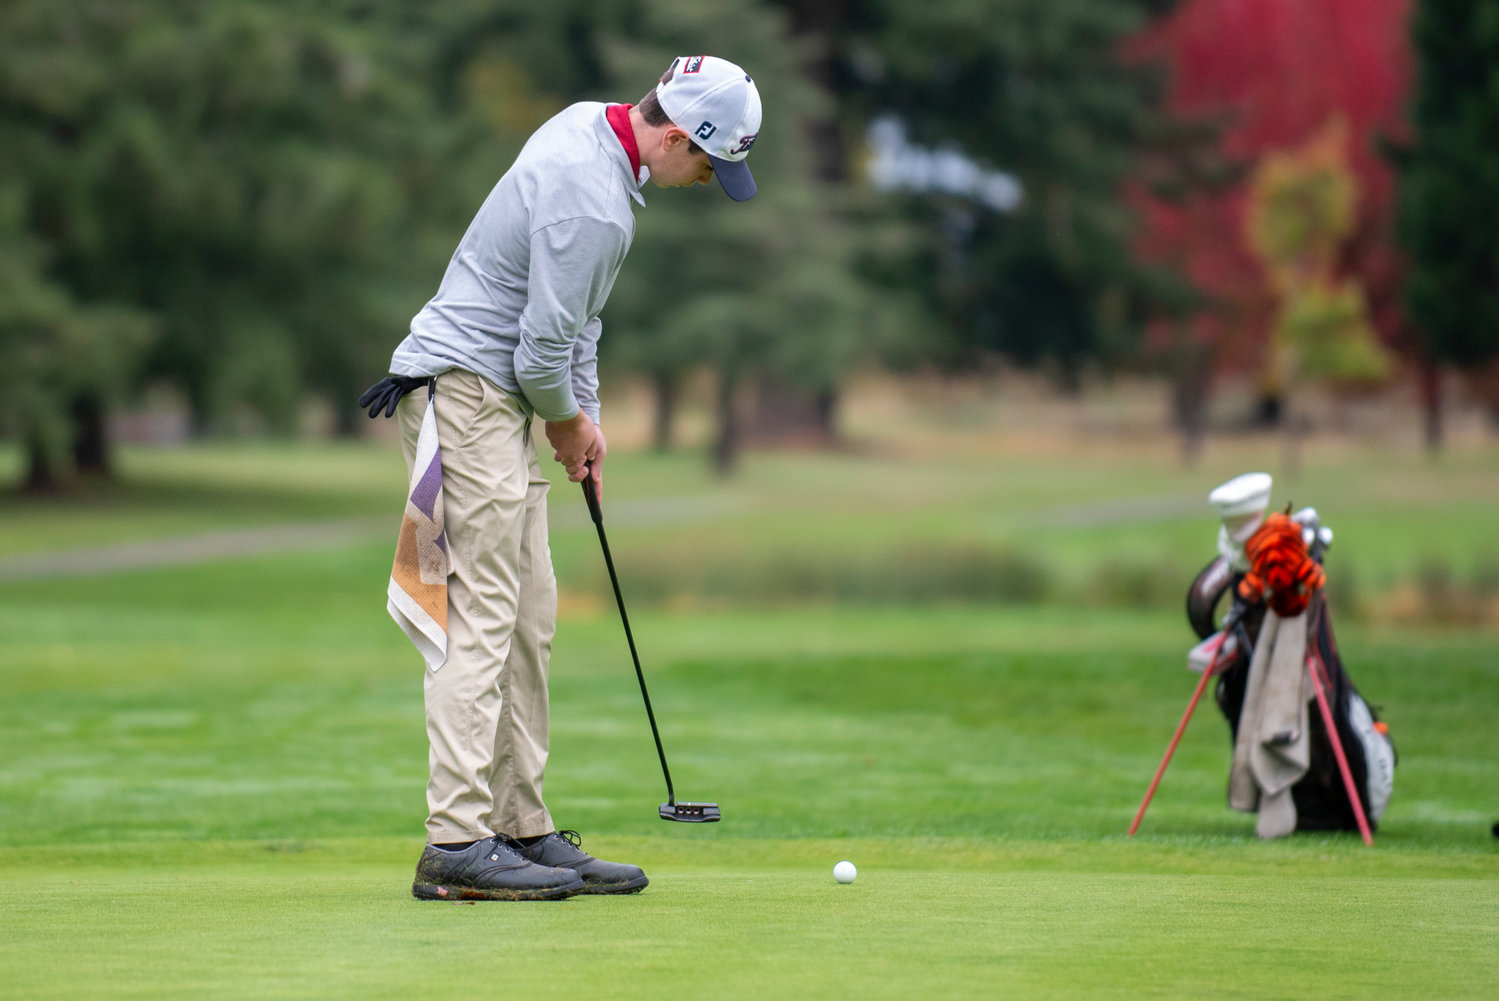 W.F. West freshman Ben Halverstadt putts on the final hole during the 2A Evergreen Conference championships on Oct, 18, 2021, at Riverside Golf Course.